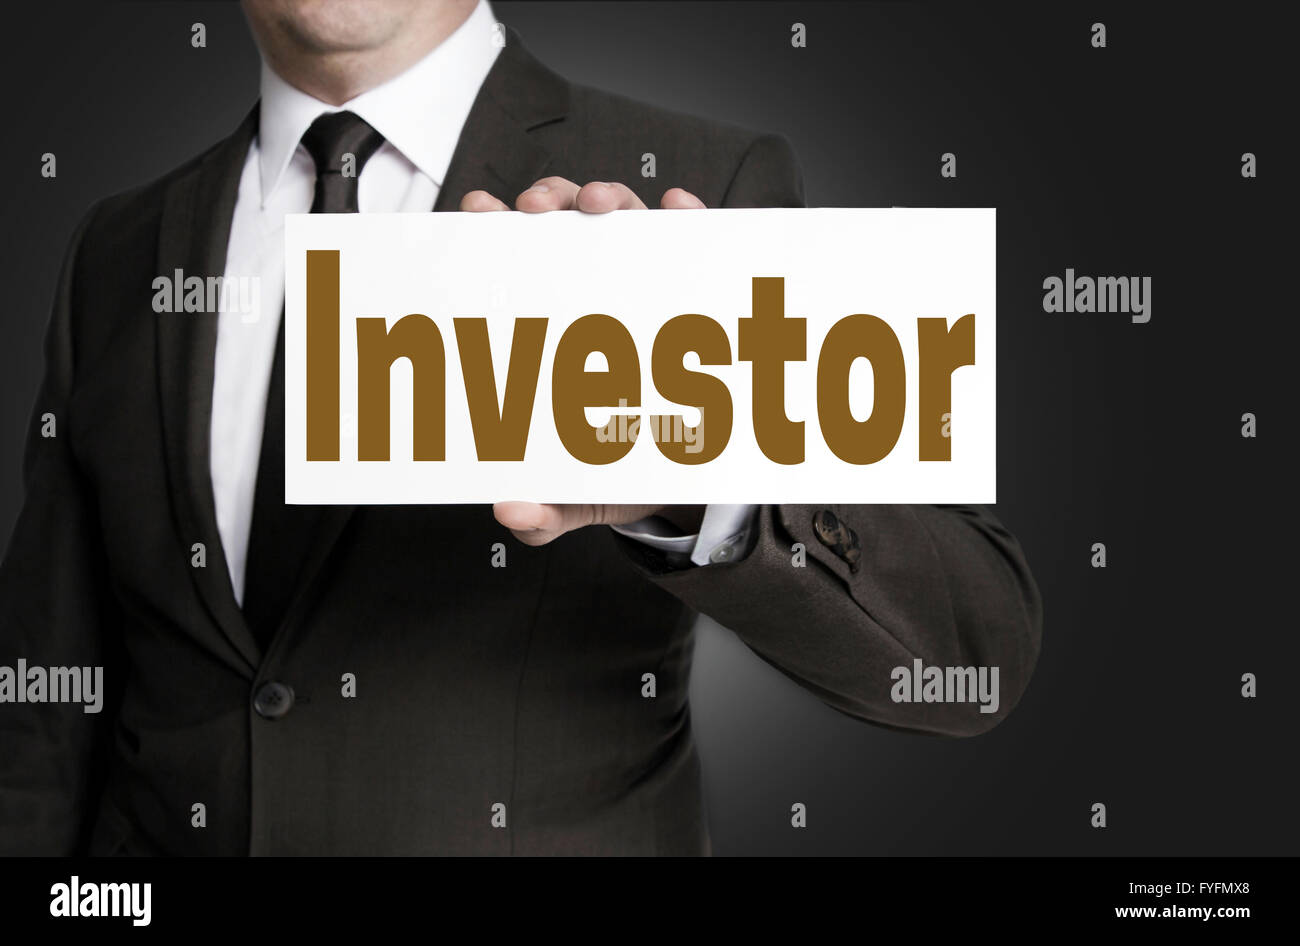 investor placard is held by businessman background. Stock Photo